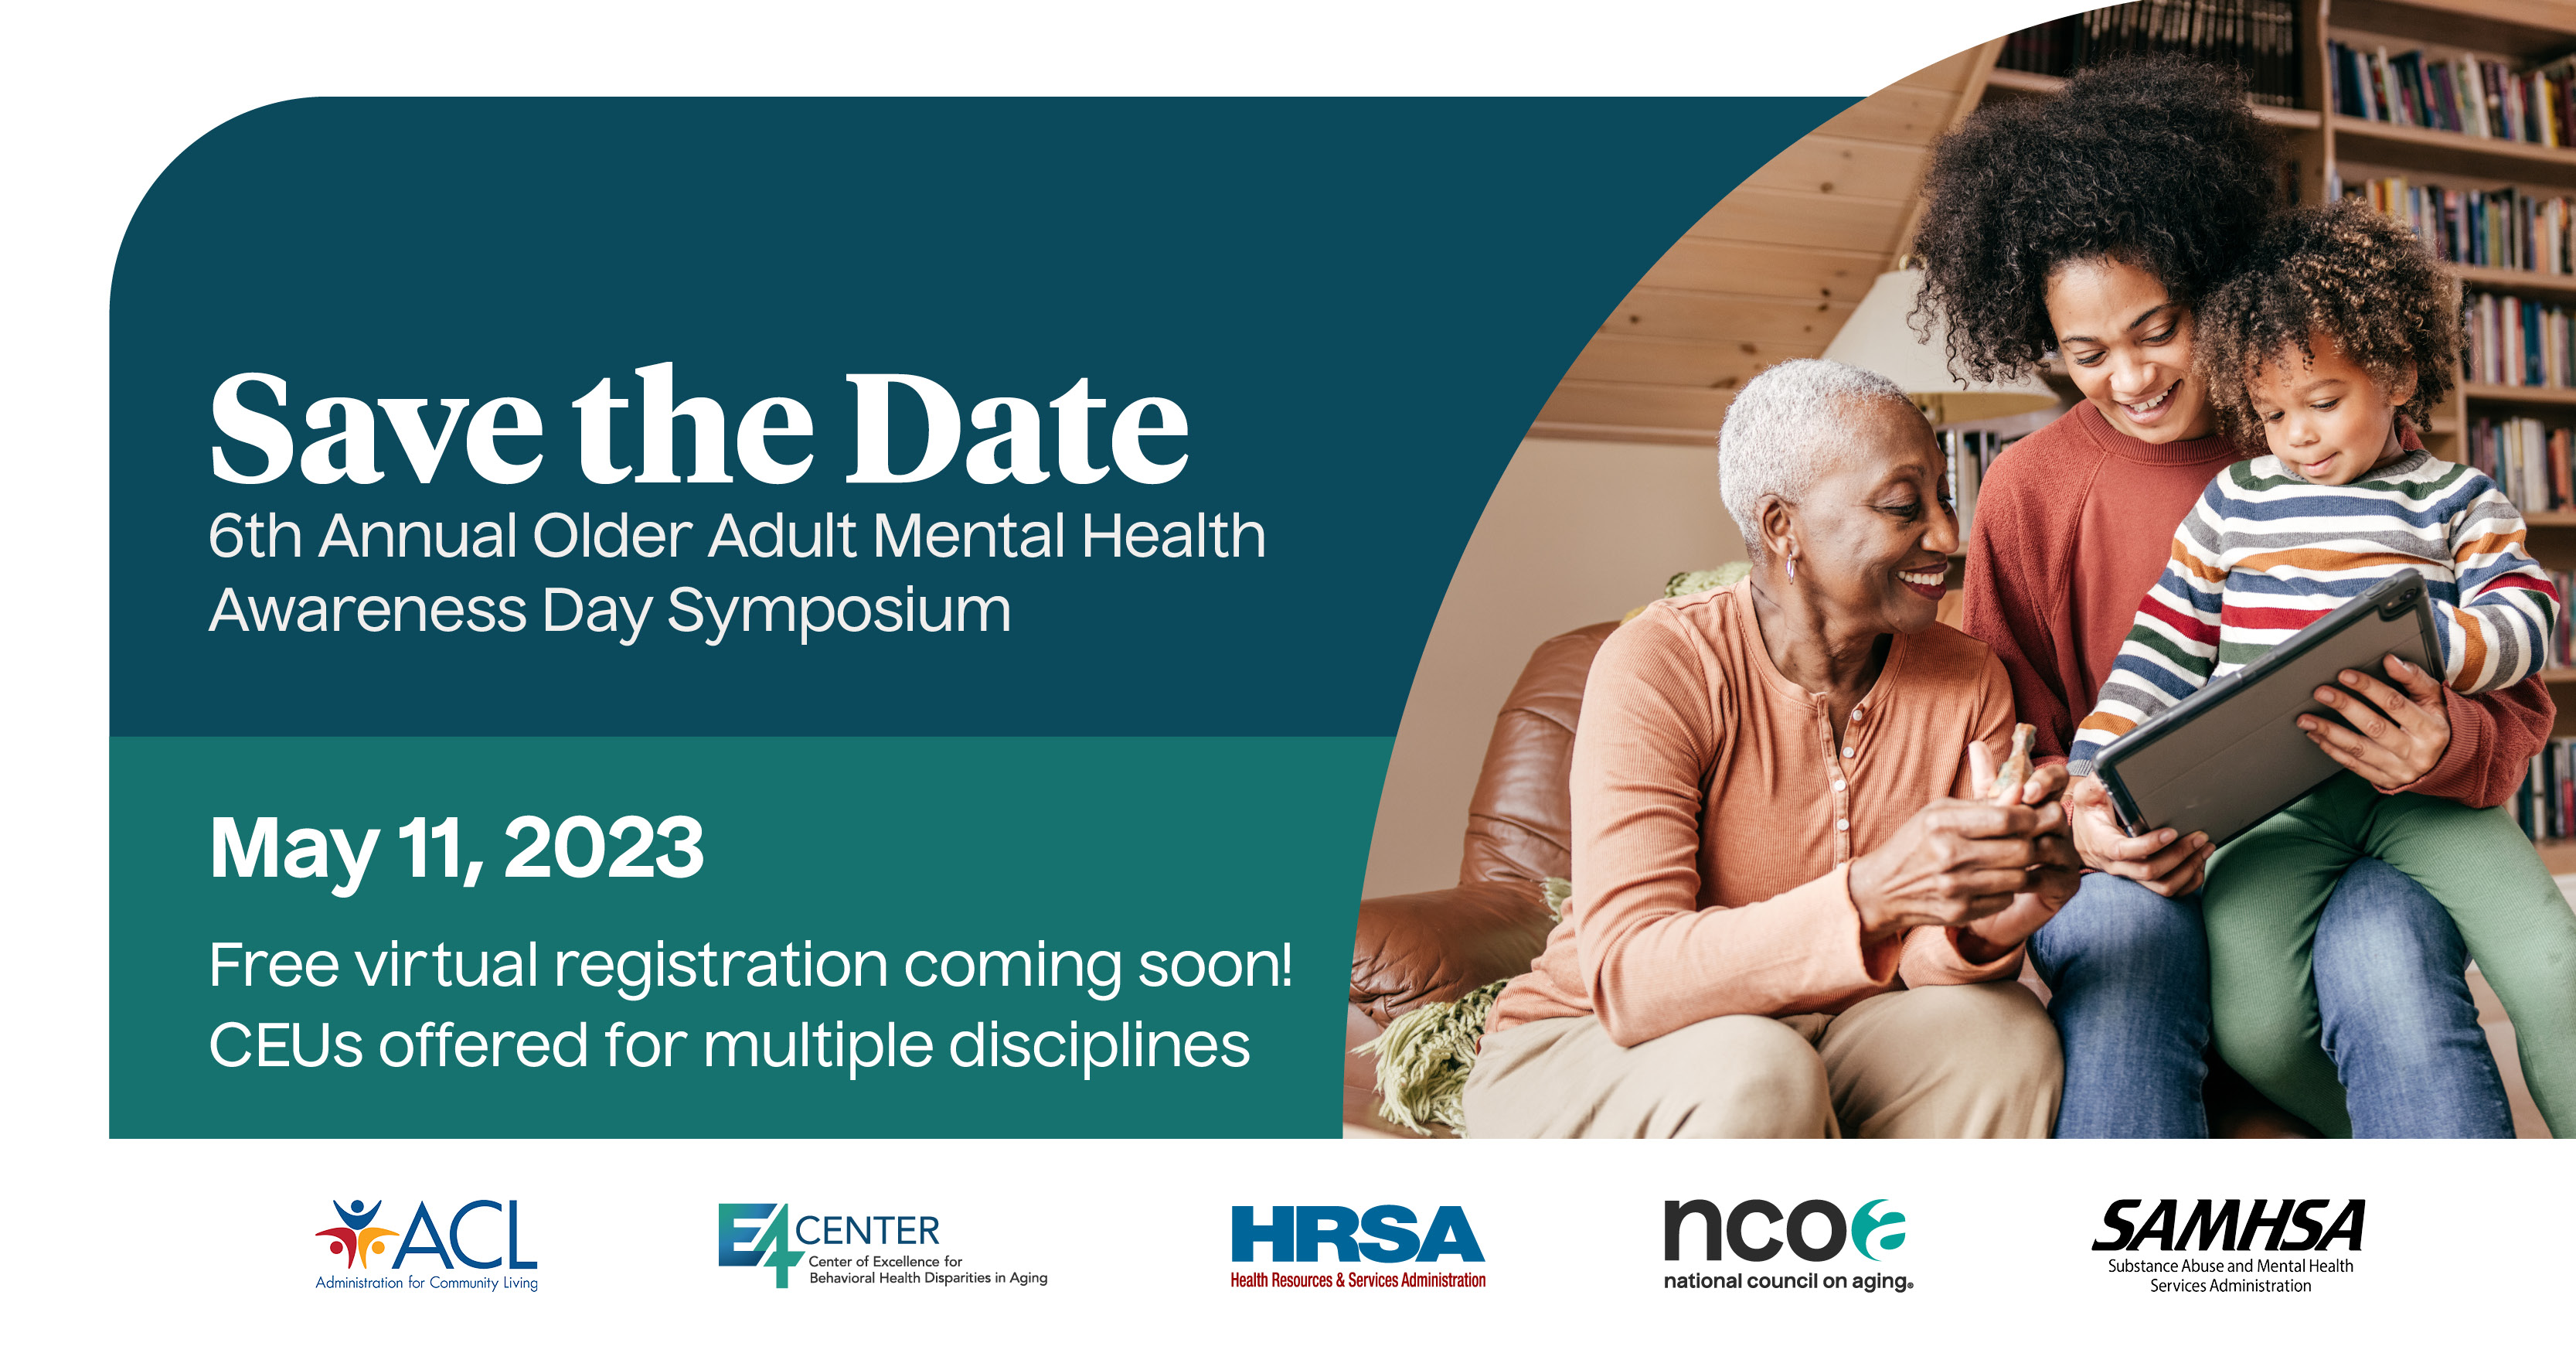 Save the Date. Sixth Annual Older Adult Mental Health Awareness Day Symposium. May 11, 2023. Free virtual registration coming soon! CEUs offered for multiple disciplines.